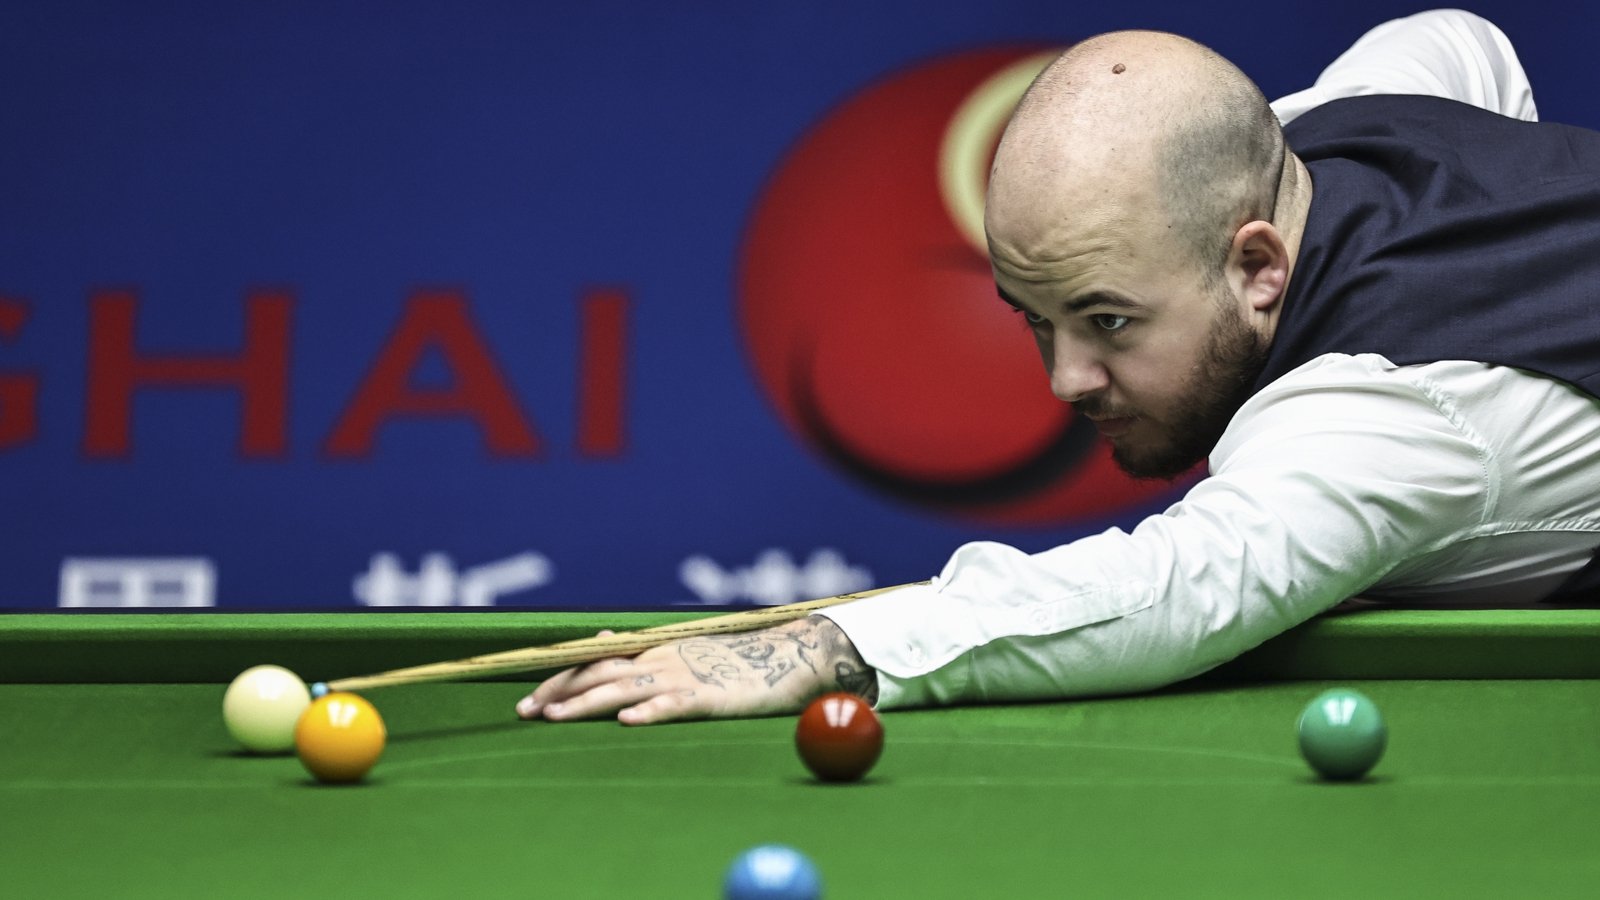 Brecel recovers to book quarter-final spot in Shanghai